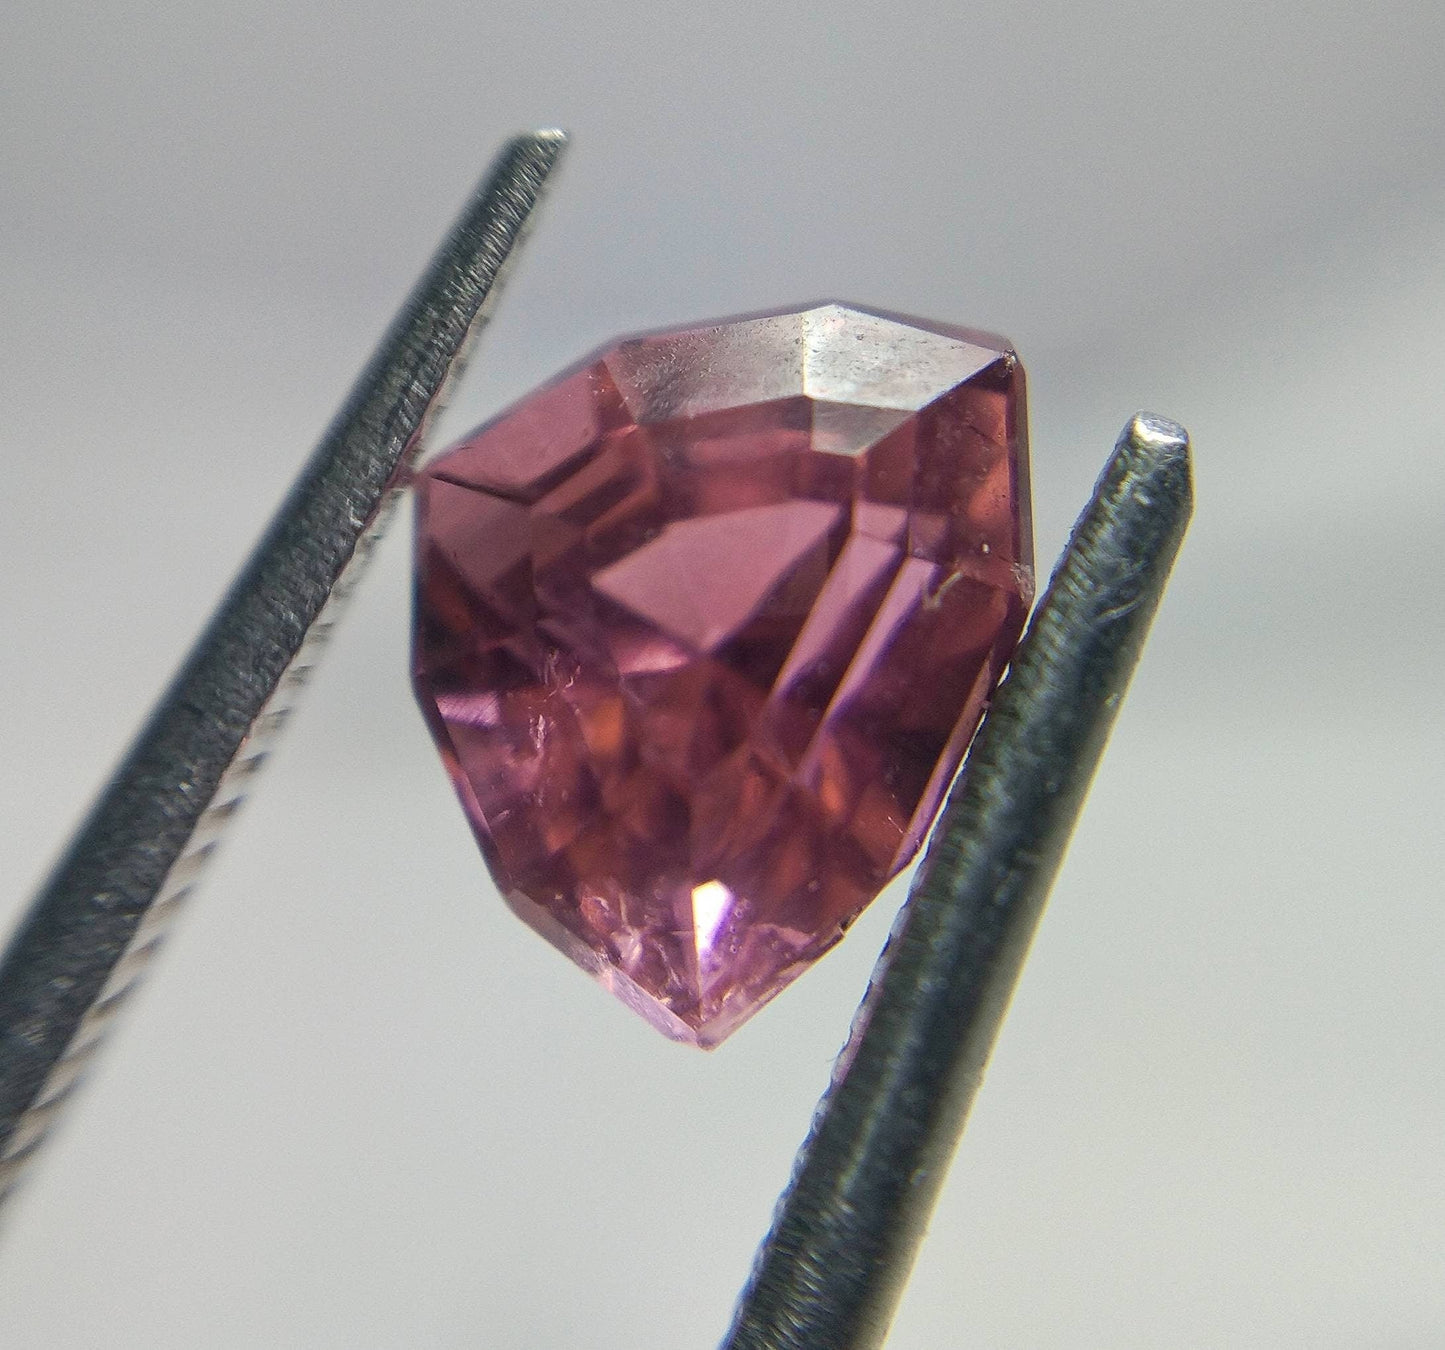 ARSAA GEMS AND MINERALSNatural top quality beautiful 7.5 carats SI clarity faceted trillion shapes pink rubellite gems - Premium  from ARSAA GEMS AND MINERALS - Just $40.00! Shop now at ARSAA GEMS AND MINERALS